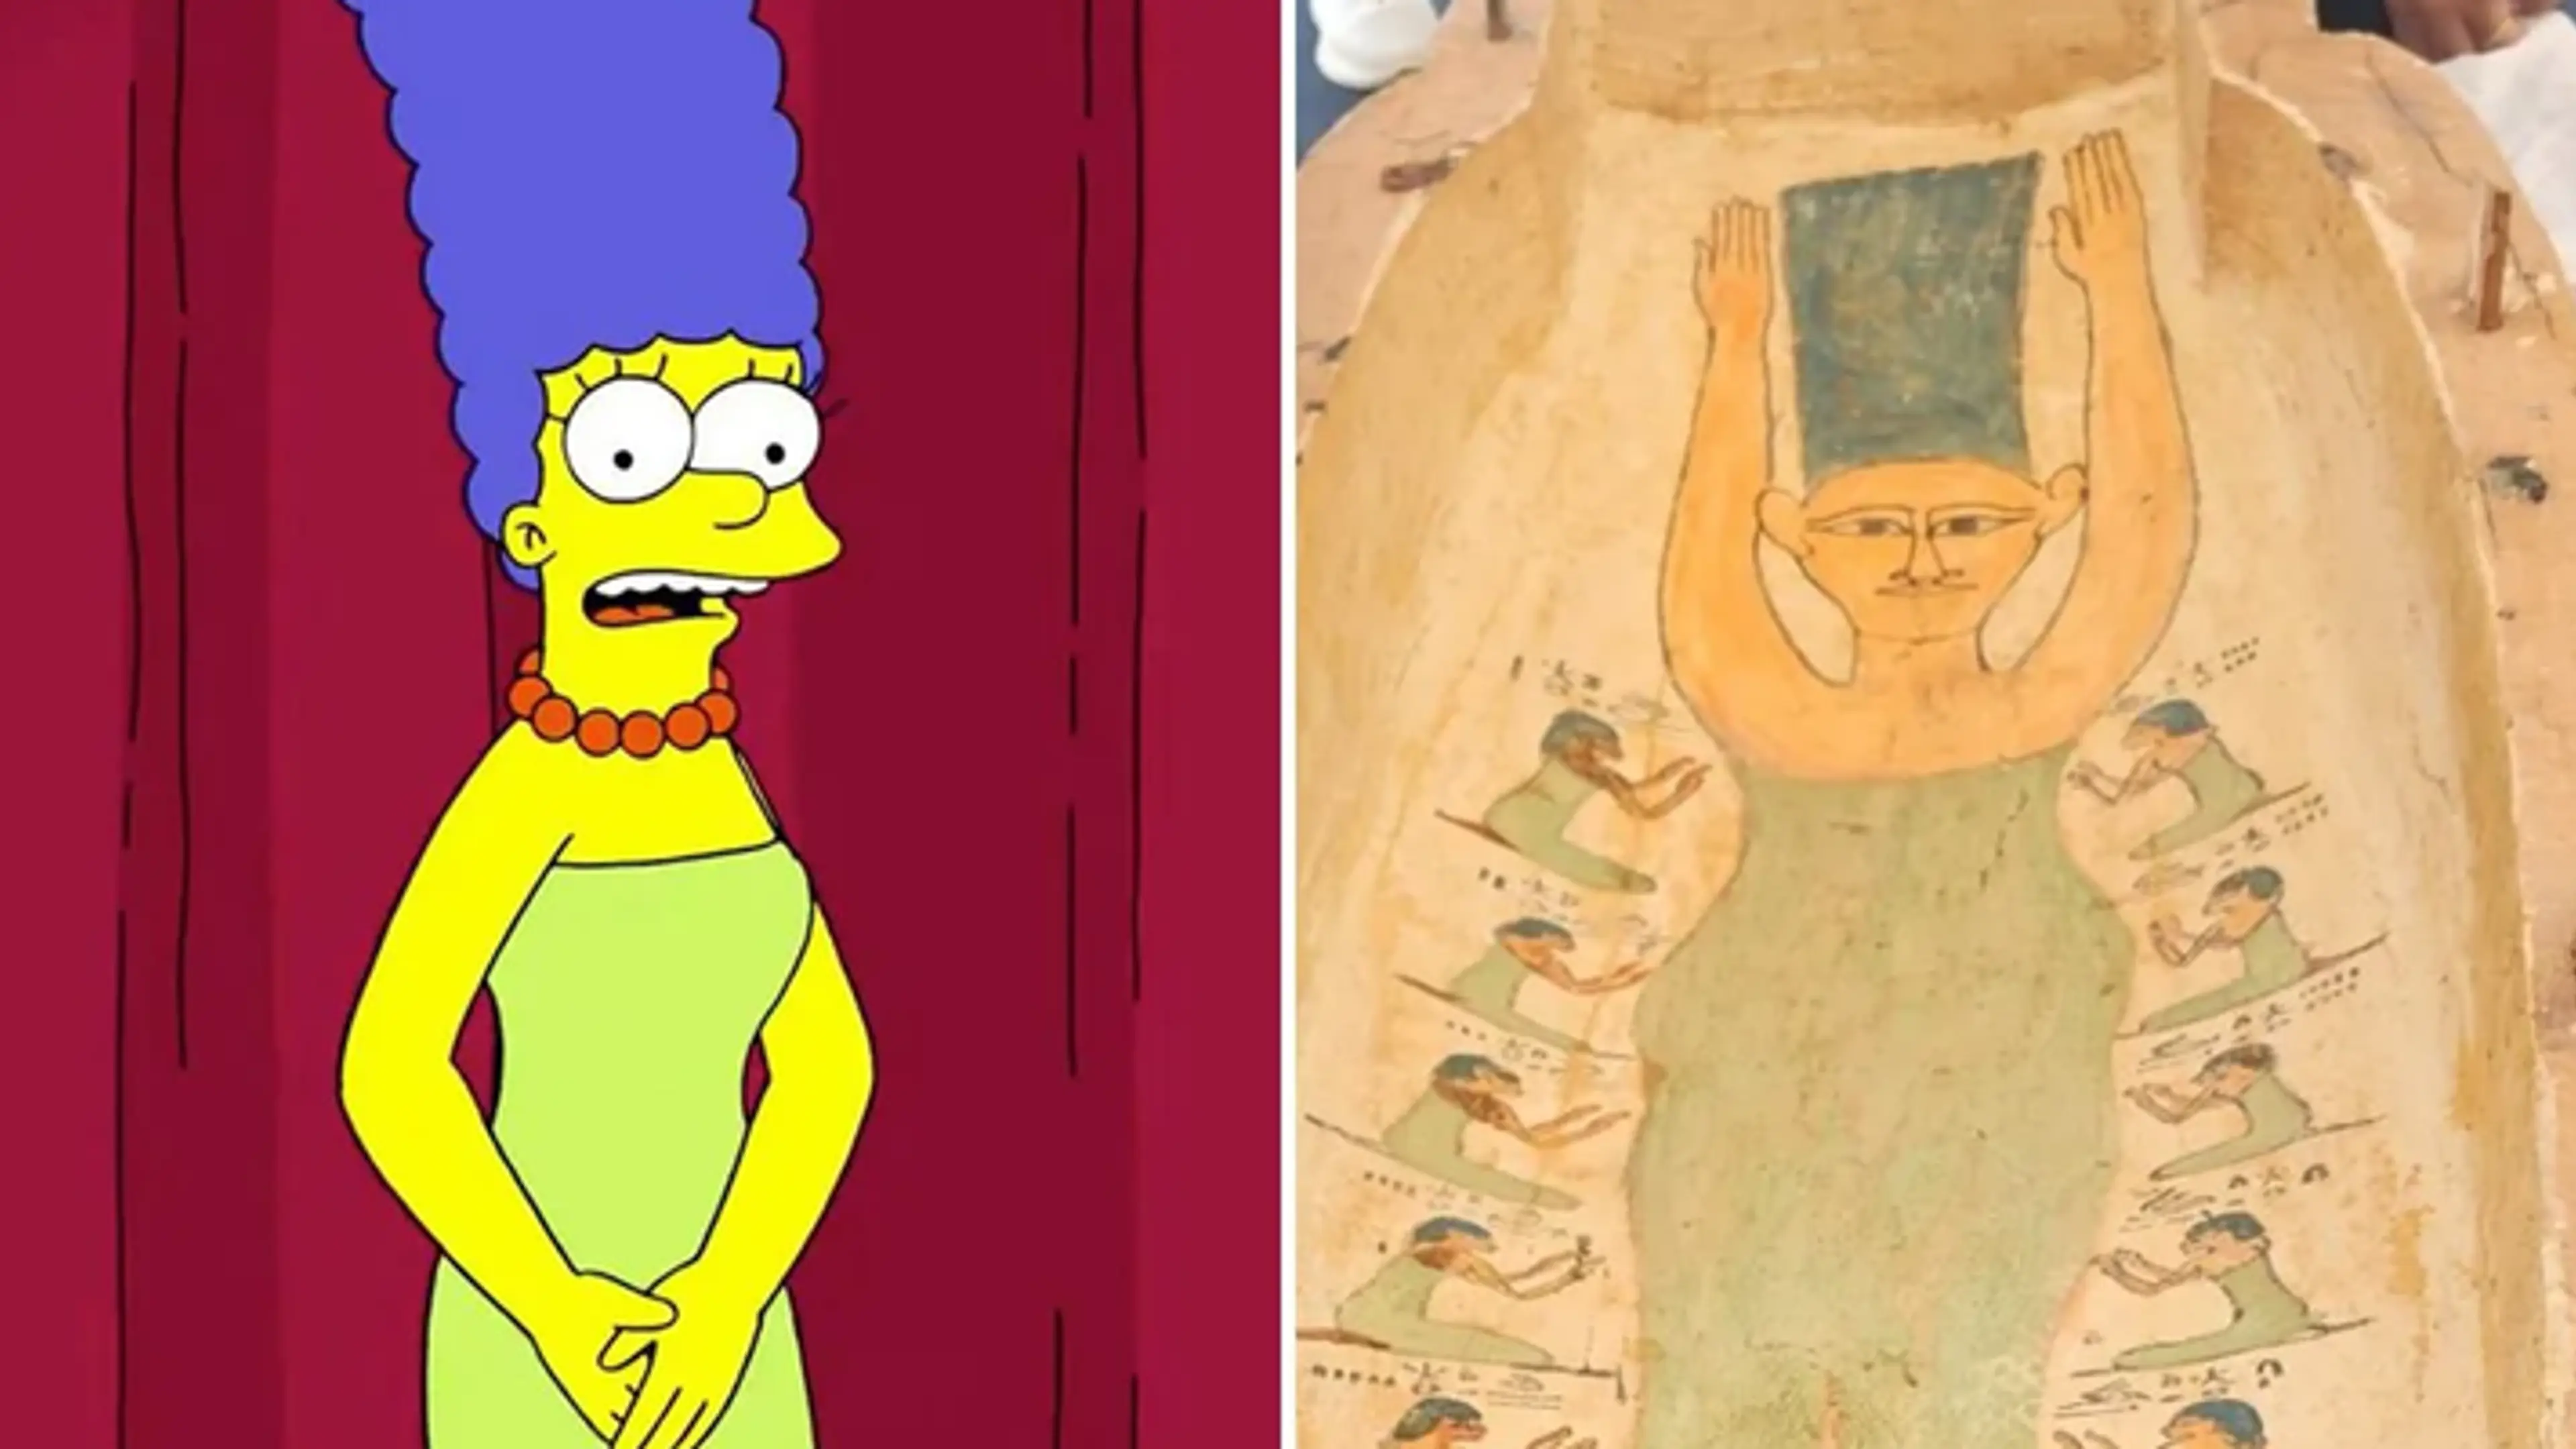 D’oh! Ancient Egyptians Predicted Marge Simpson 3,500 Years Ago! Or Did They?